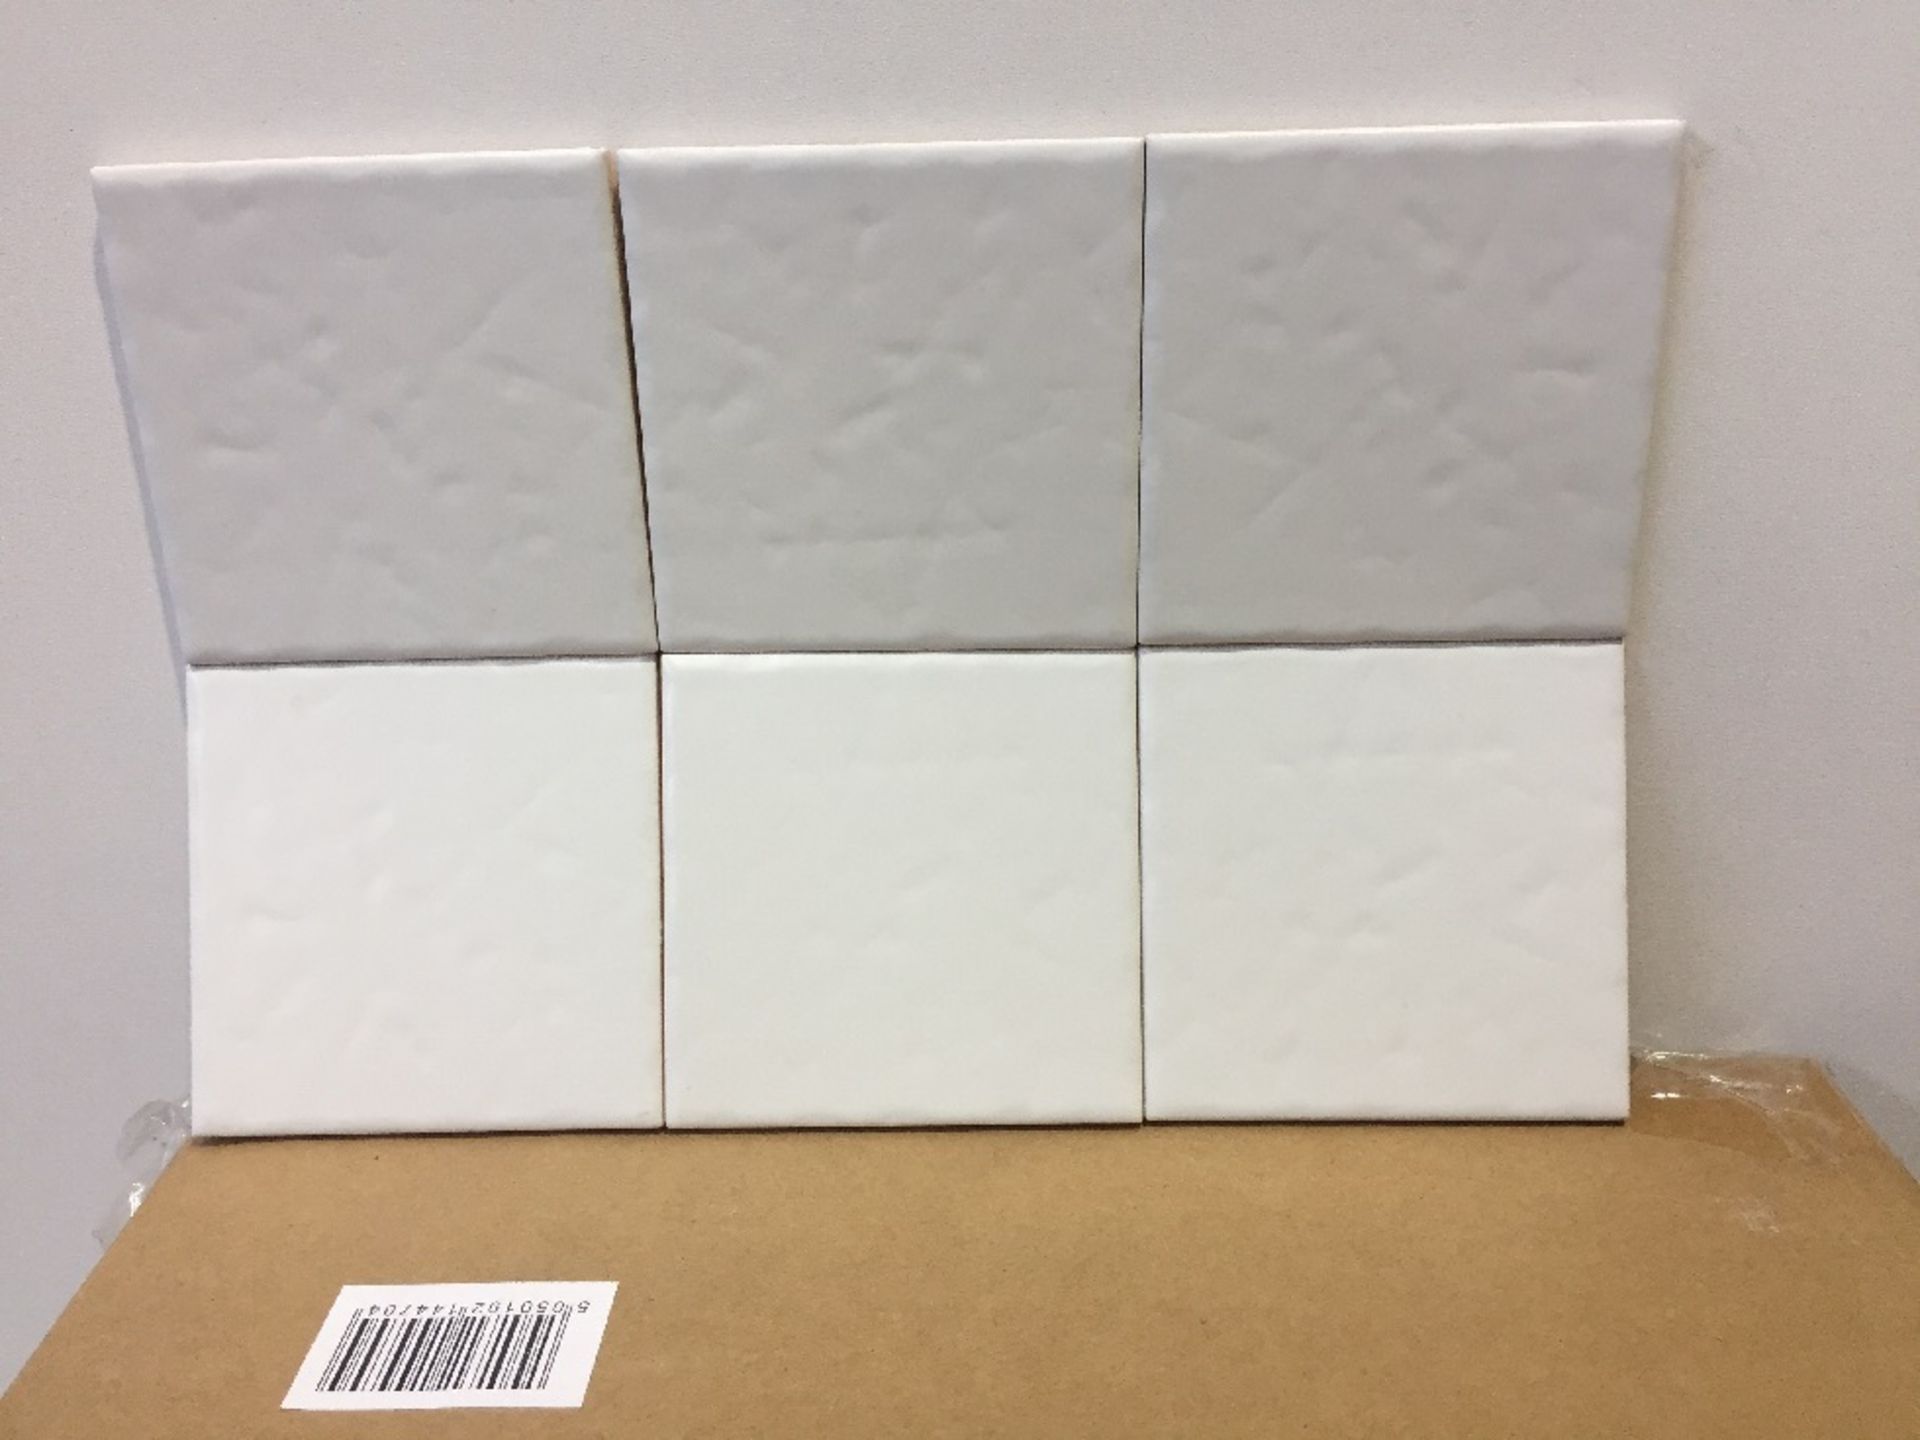 4 BRAND NEW BOXES OF JOHNSONS BATHROOM TILES IN COTSWOLD SHADED WHITE, 25 TILES TO A BOX, 10CM X